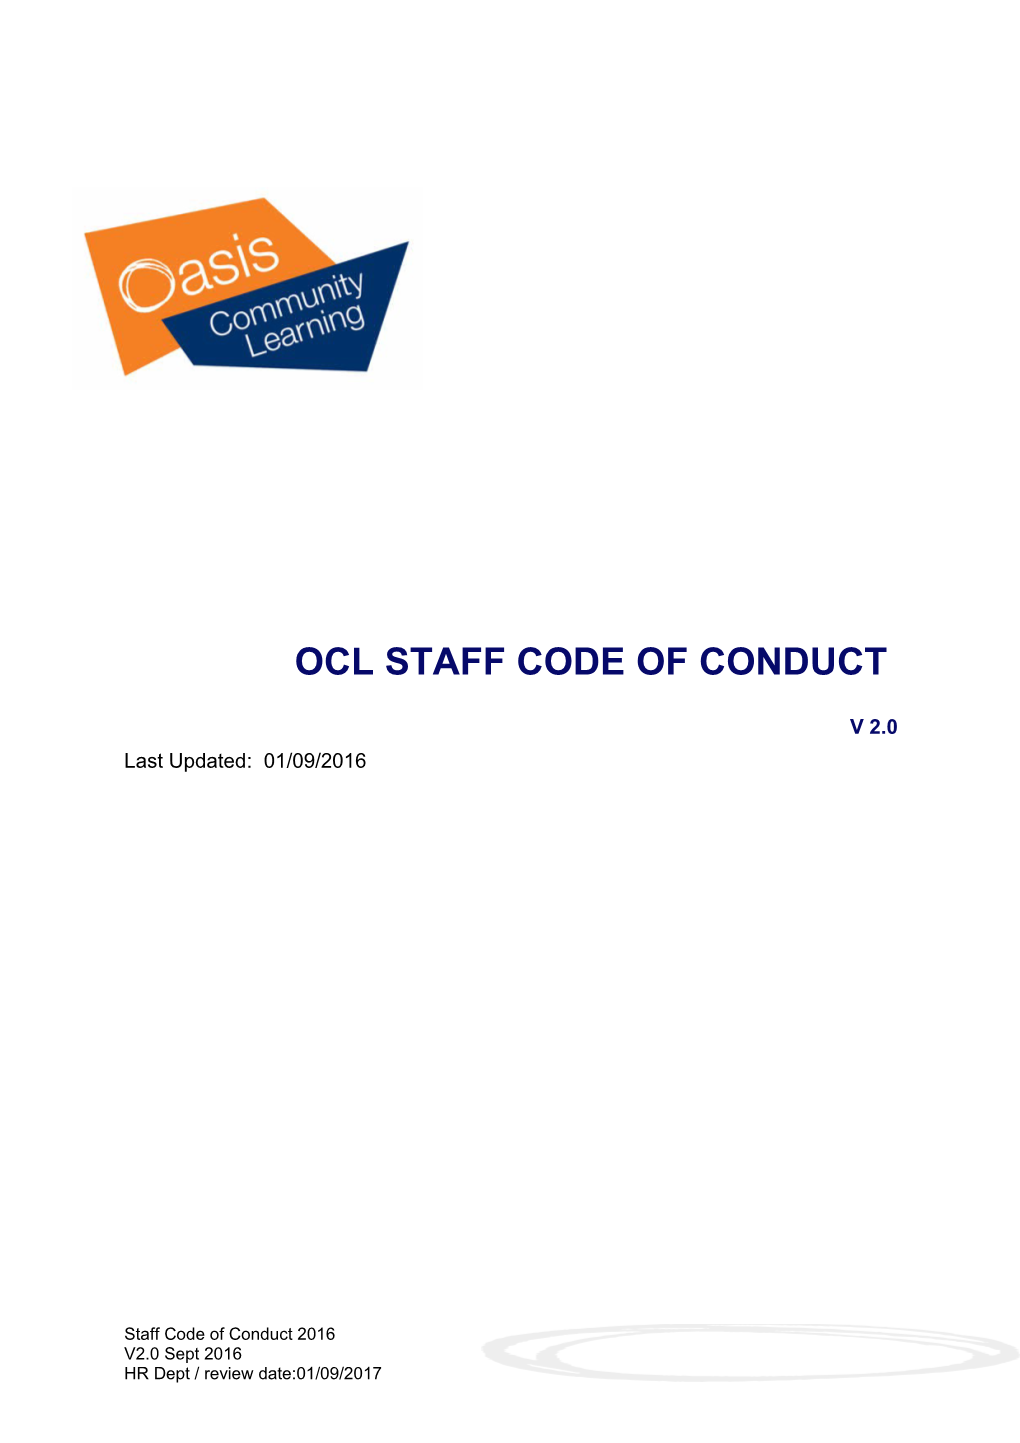 Staff Code of Conduct 2016